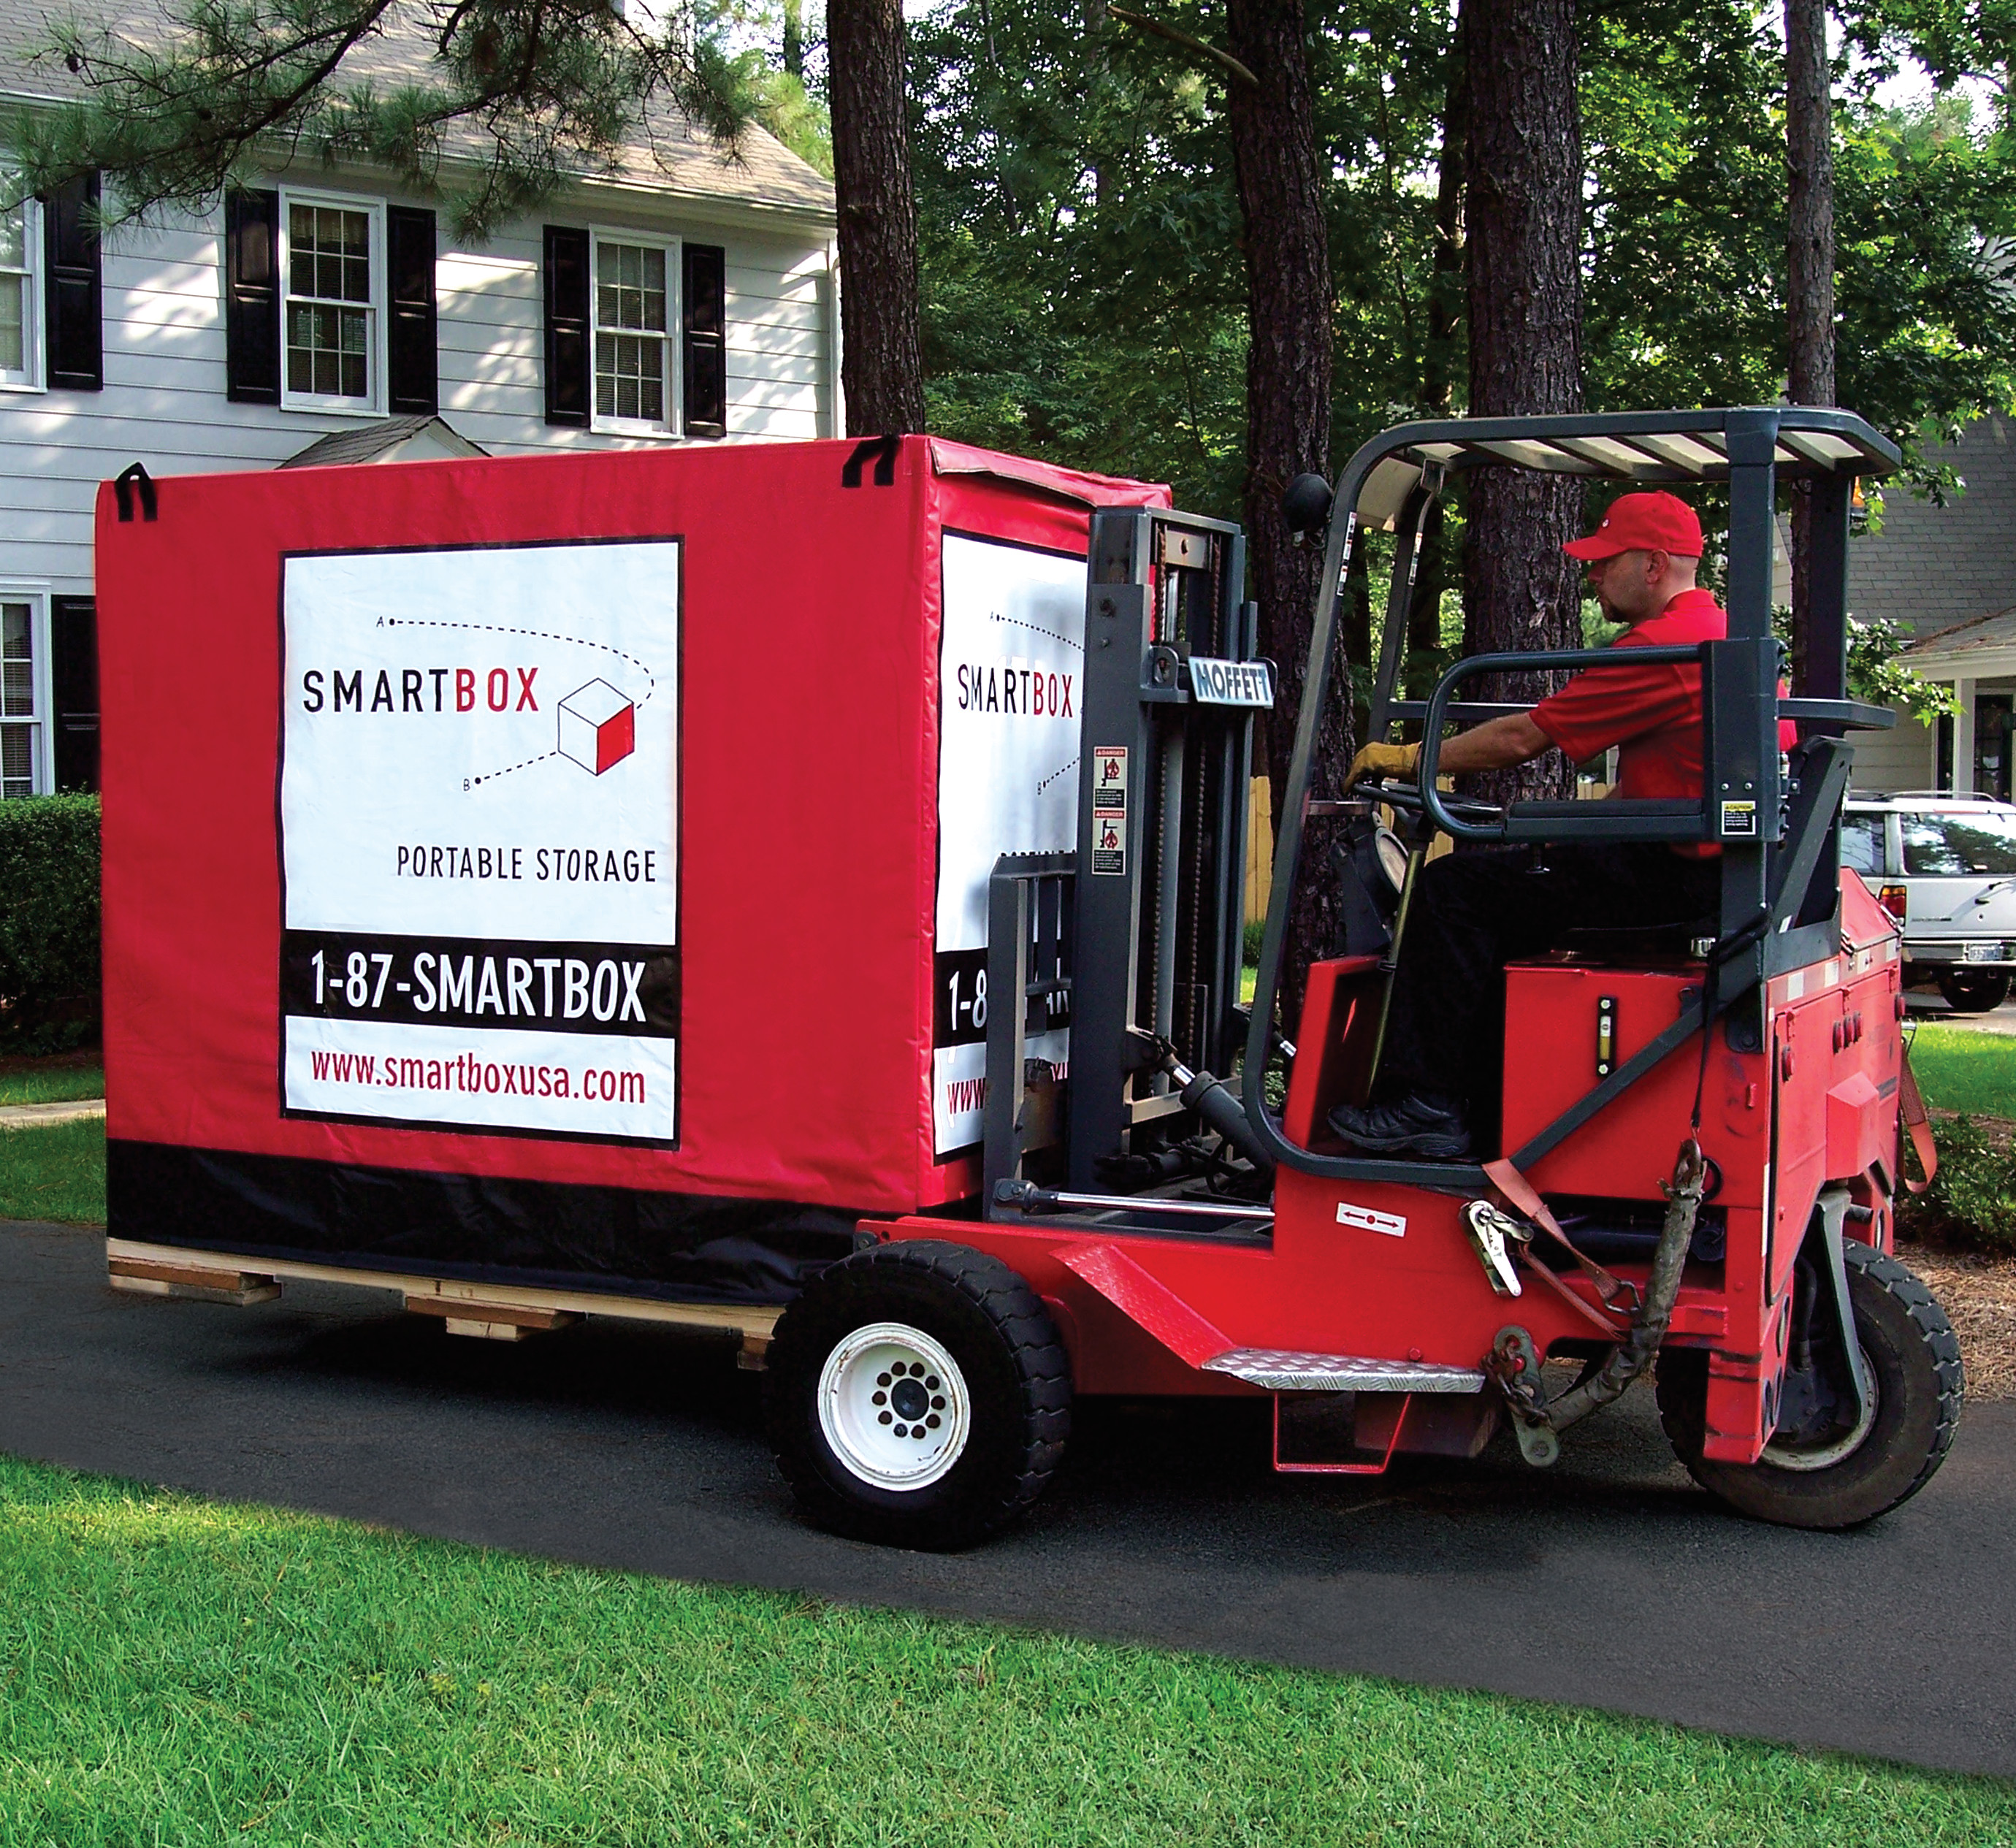 SMARTBOX delivers moving and storage solutions to your door step!